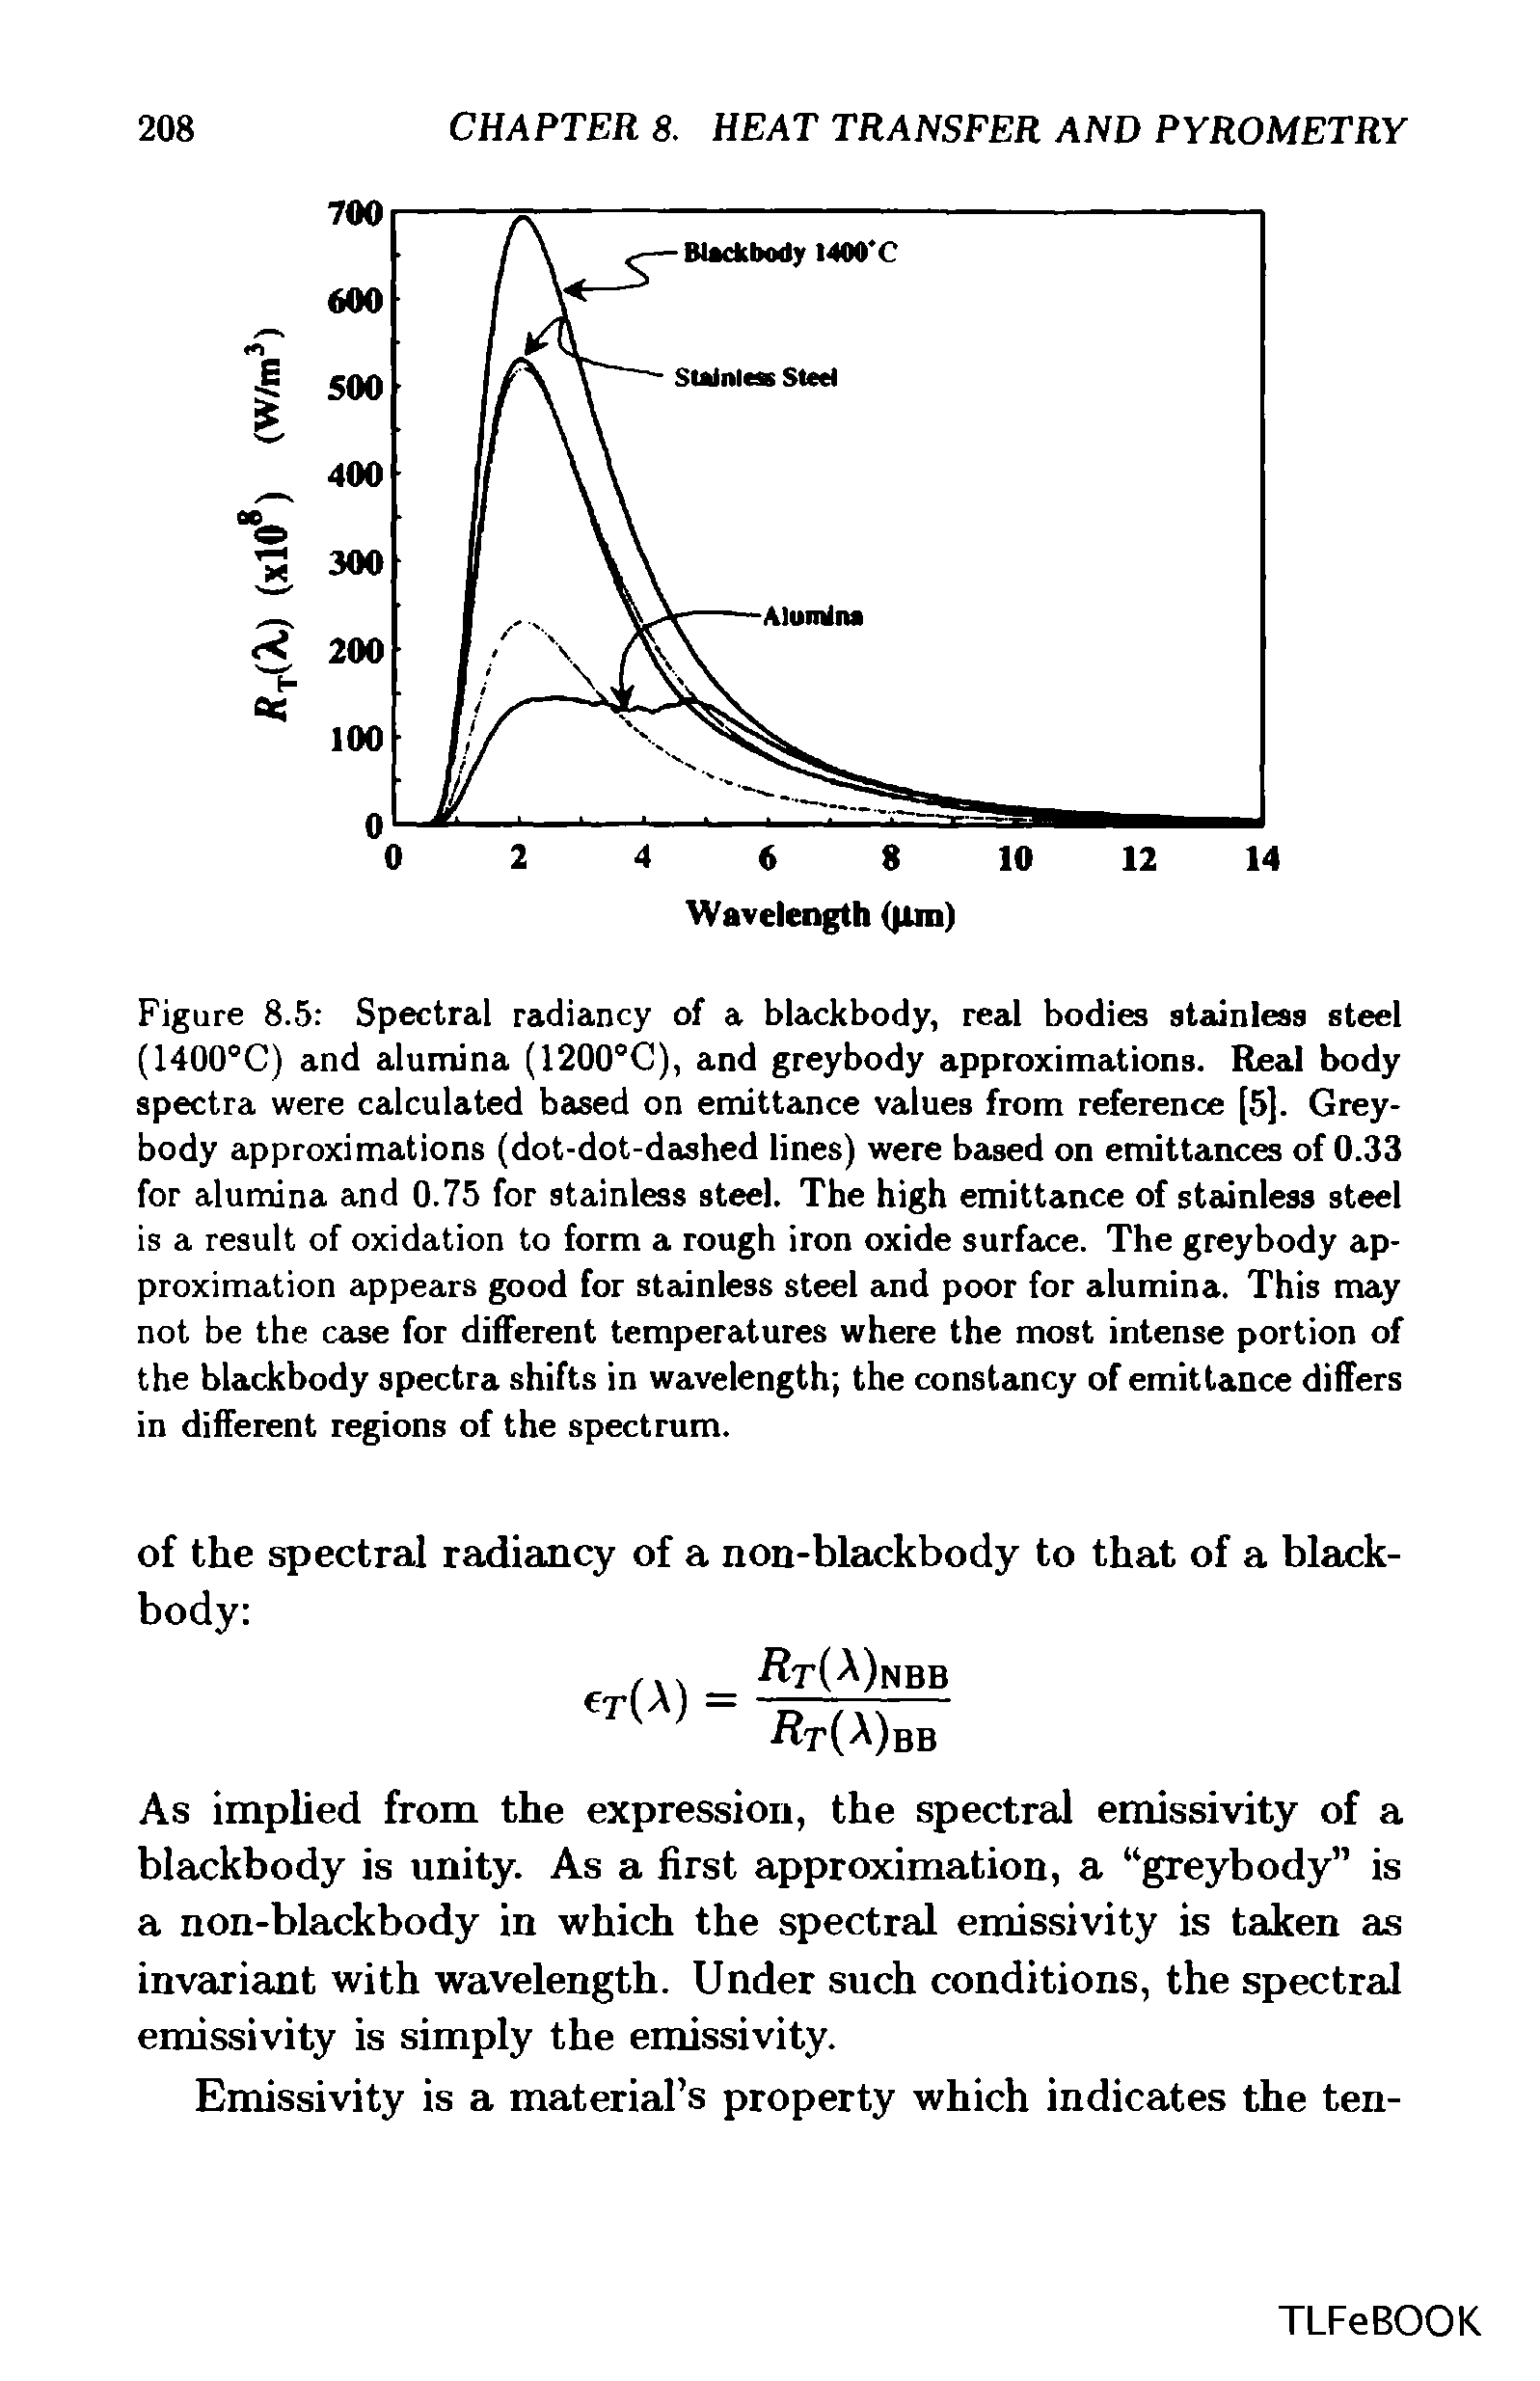 Figure 8.5 Spectral radiancy of a blackbody, real bodies stainless steel (1400°C) and alumina (1200°C), and greybody approximations. Real body spectra were calculated based on emittance values from reference [5]. Greybody approximations (dot-dot-dashed lines) were based on emittances of 0.33 for alumina and 0.75 for stainless steel. The high emittance of stainless steel is a result of oxidation to form a rough iron oxide surface. The greybody approximation appears good for stainless steel and poor for alumina. This may not be the case for different temperatures where the most intense portion of the blackbody spectra shifts in wavelength the constancy of emittance differs in different regions of the spectrum.